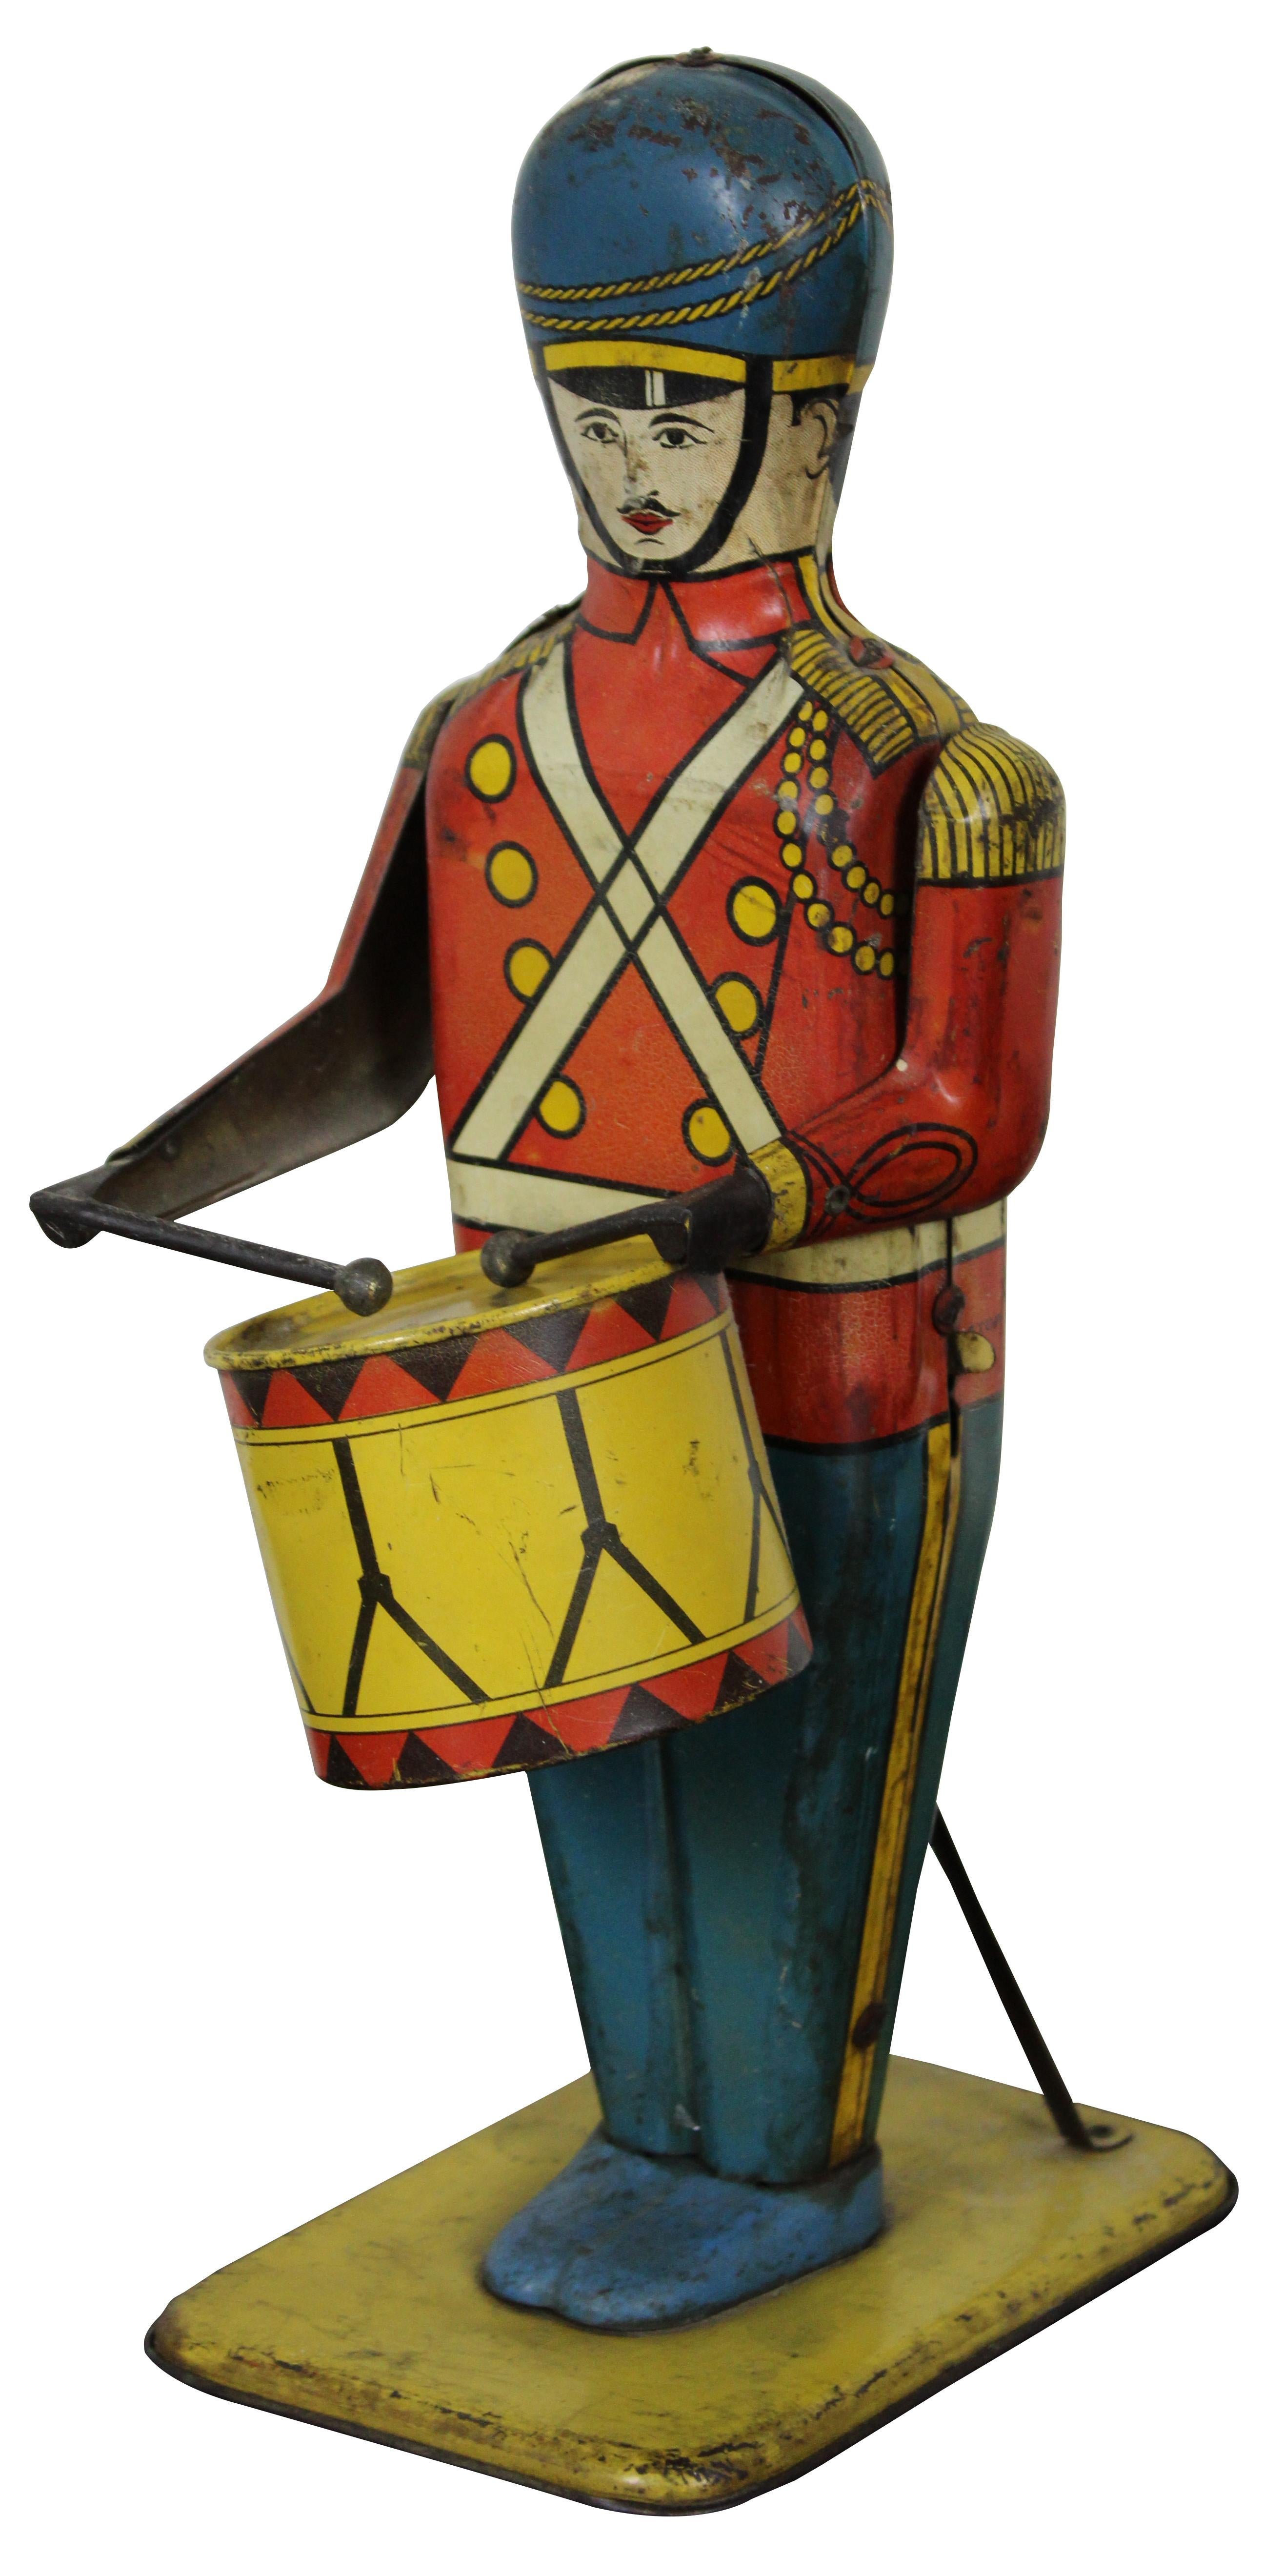 Antique 1939 lithograph tin soldier by Wolverine Supply and Manufacturing Company, No 27 Drum Major, dressed in a red coat with blue hat and pants; plays his drum when you wind the key in his back.
      